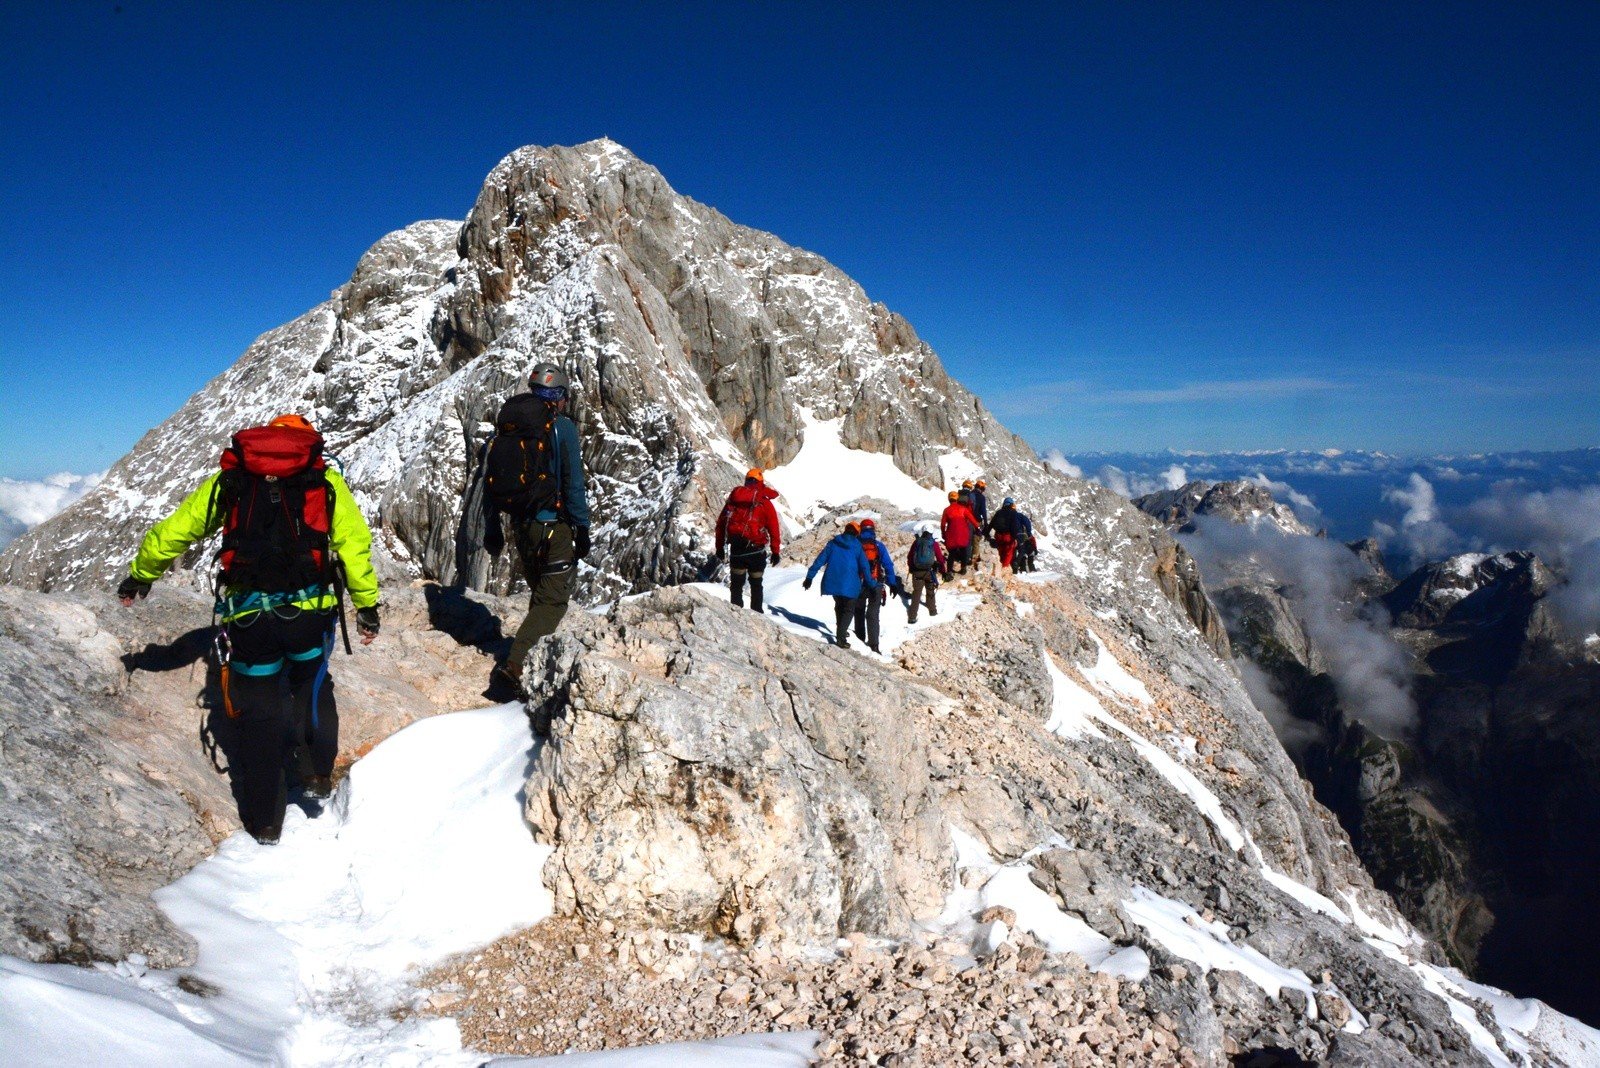 The route to the summit of Mount Triglav, the highest mountain in Slovenia